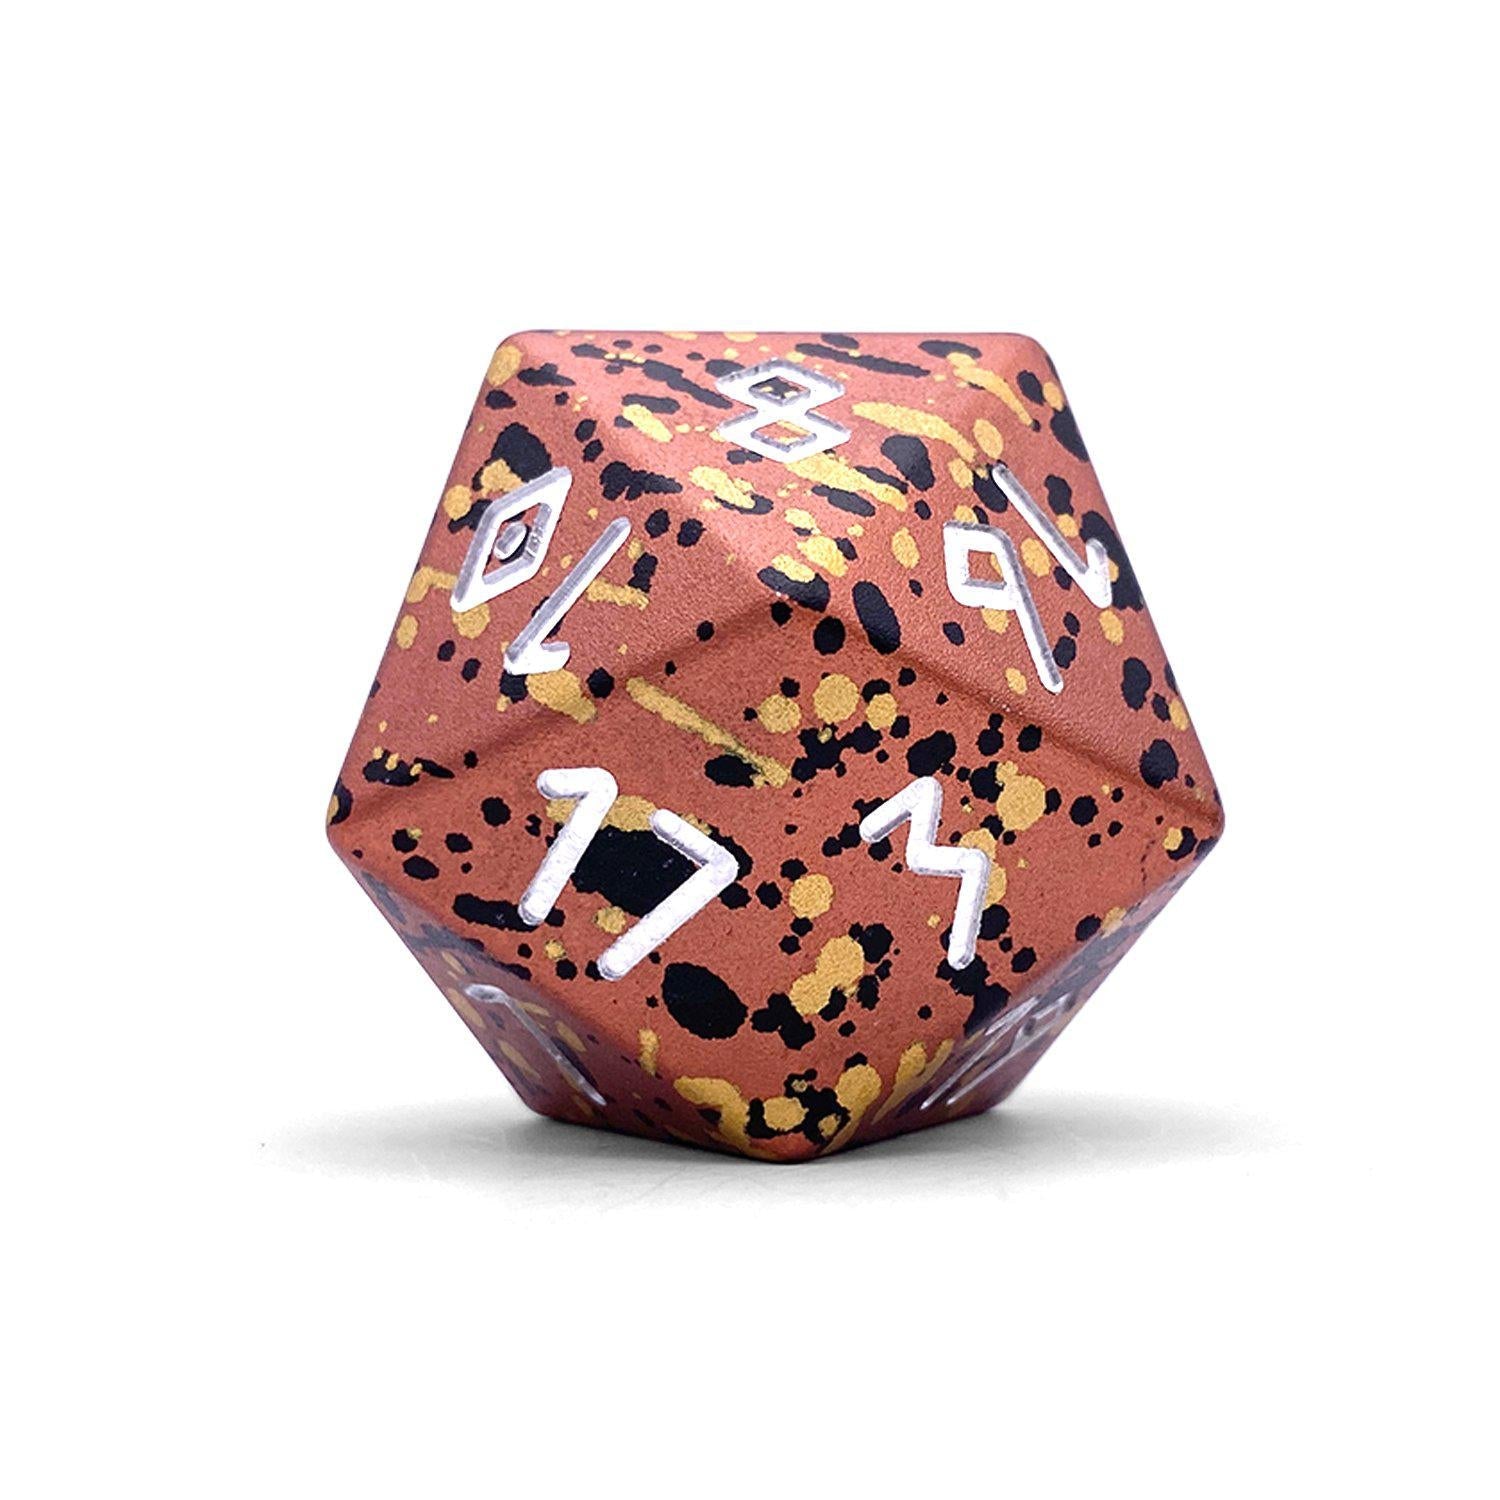 Single Wondrous Dice® D20 in Fire Elemental by Norse Foundry 6063 Aircraft Grade Aluminum - NOR 02403